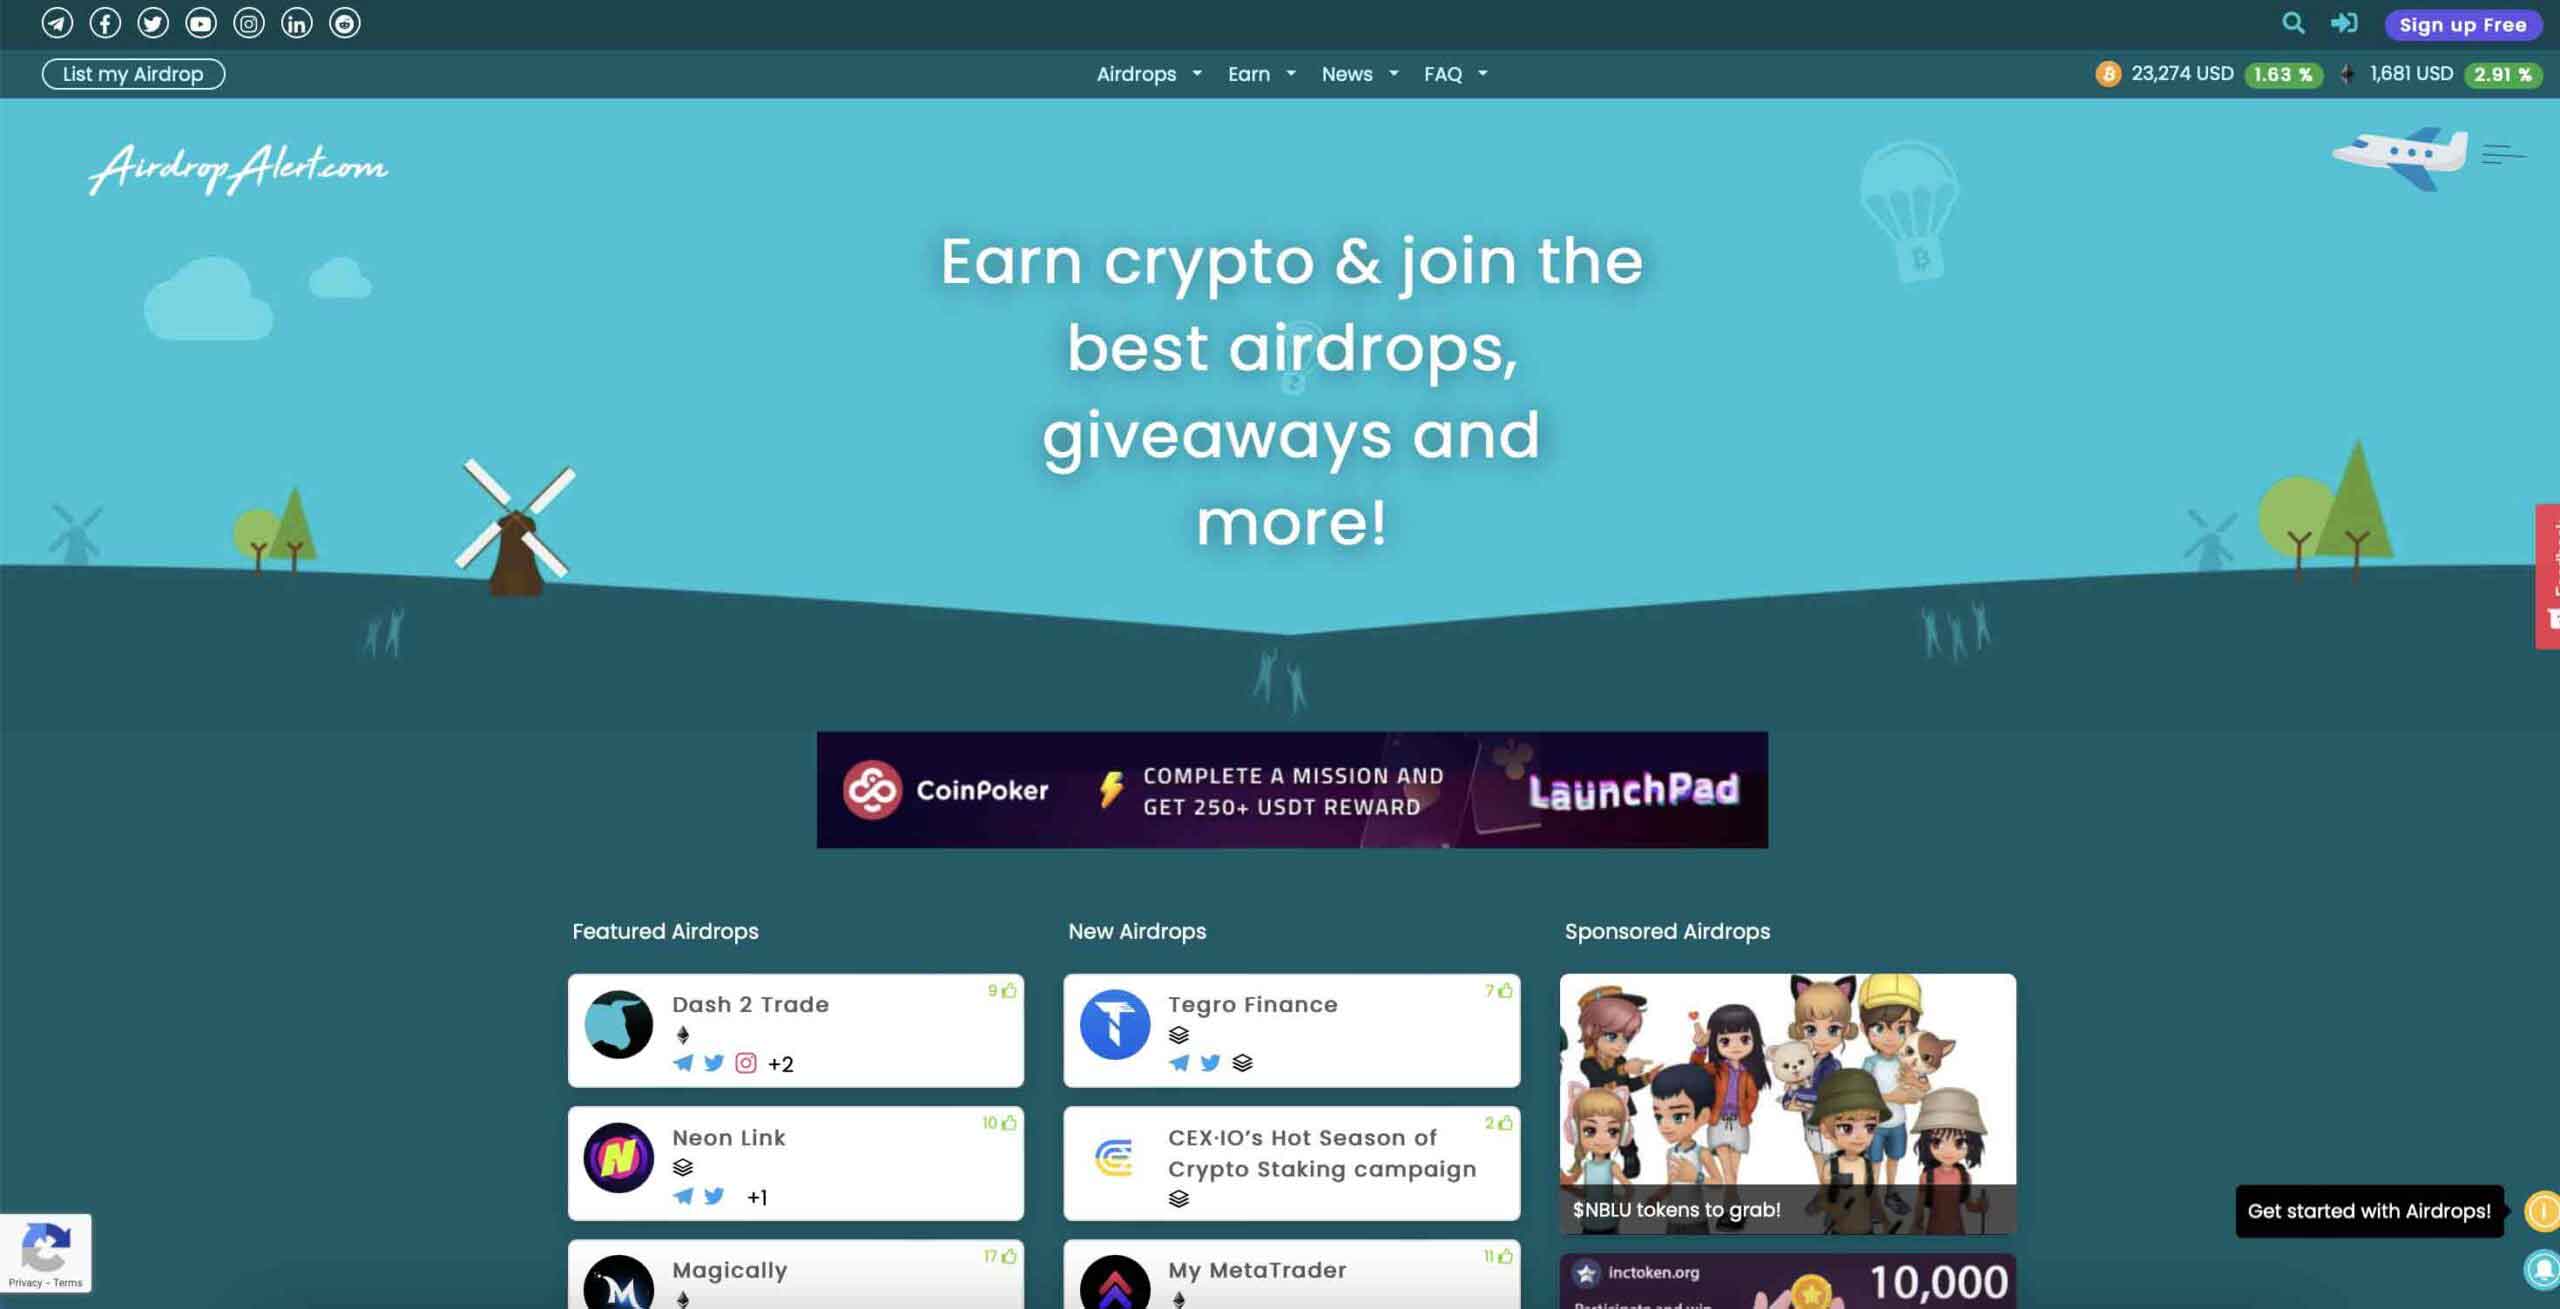 Airdrop Alert: The dashboard of a crypto airdrops platform.